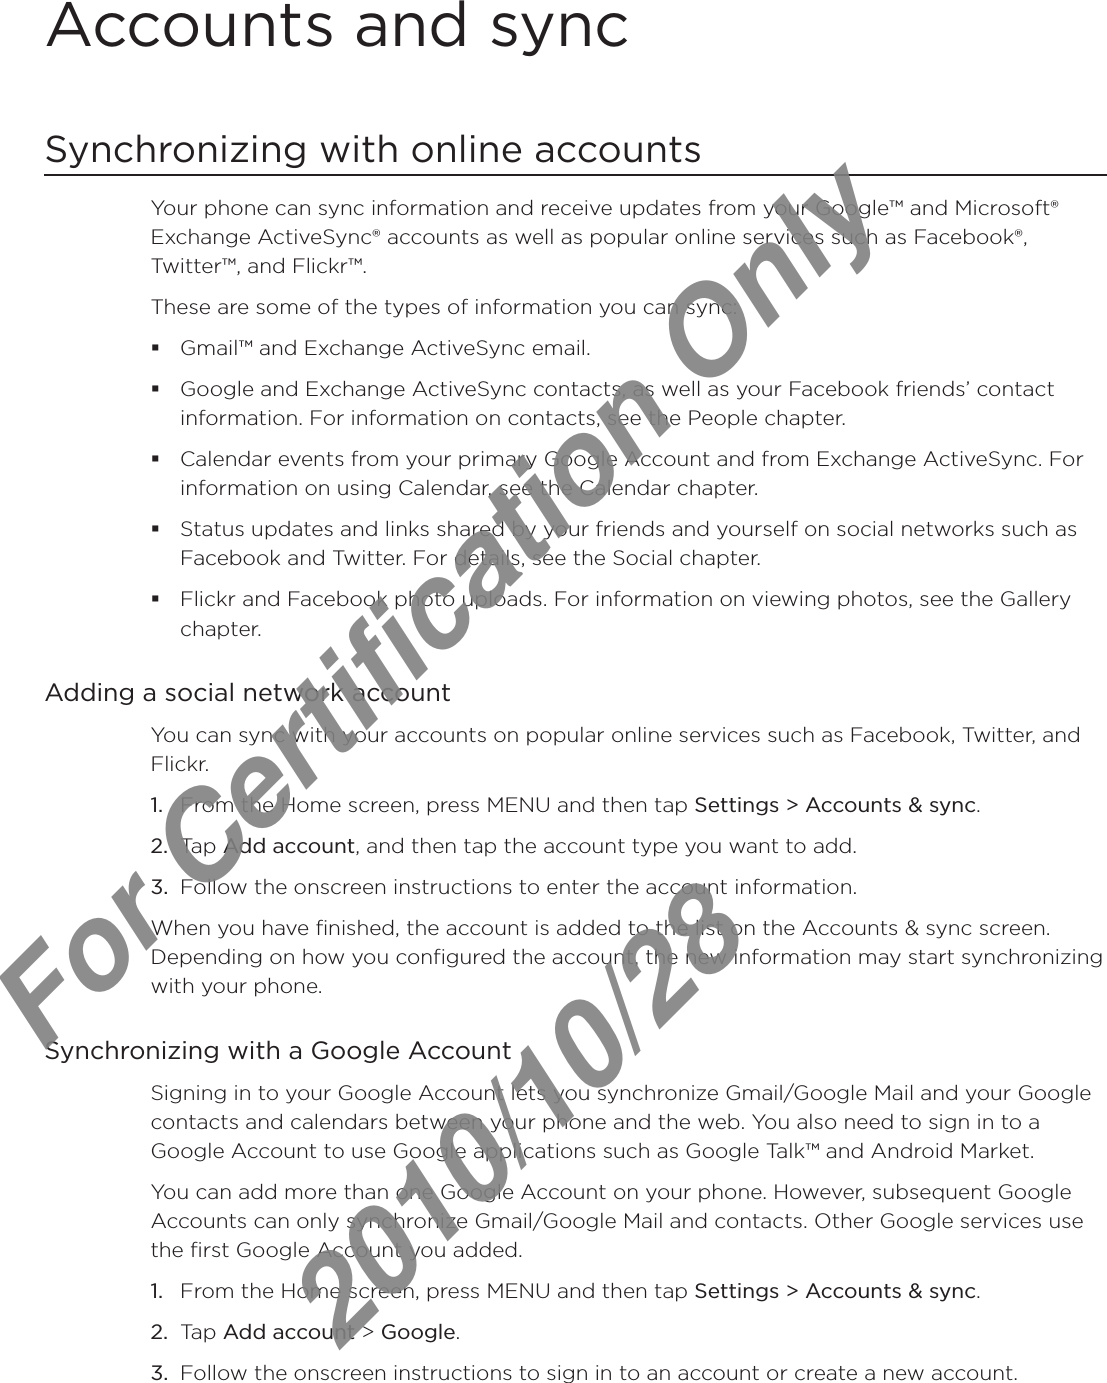 Accounts and syncSynchronizing with online accountsYour phone can sync information and receive updates from your Google™ and Microsoft® Exchange ActiveSync® accounts as well as popular online services such as Facebook®, Twitter™, and Flickr™.These are some of the types of information you can sync:Gmail™ and Exchange ActiveSync email.Google and Exchange ActiveSync contacts, as well as your Facebook friends’ contact information. For information on contacts, see the People chapter.Calendar events from your primary Google Account and from Exchange ActiveSync. For information on using Calendar, see the Calendar chapter.Status updates and links shared by your friends and yourself on social networks such as Facebook and Twitter. For details, see the Social chapter.Flickr and Facebook photo uploads. For information on viewing photos, see the Gallery chapter.Adding a social network accountYou can sync with your accounts on popular online services such as Facebook, Twitter, and Flickr.From the Home screen, press MENU and then tap Settings &gt; Accounts &amp; sync. Tap Add account, and then tap the account type you want to add.Follow the onscreen instructions to enter the account information.When you have finished, the account is added to the list on the Accounts &amp; sync screen. Depending on how you configured the account, the new information may start synchronizing with your phone.Synchronizing with a Google AccountSigning in to your Google Account lets you synchronize Gmail/Google Mail and your Google contacts and calendars between your phone and the web. You also need to sign in to a Google Account to use Google applications such as Google Talk™ and Android Market.You can add more than one Google Account on your phone. However, subsequent Google Accounts can only synchronize Gmail/Google Mail and contacts. Other Google services use the first Google Account you added.From the Home screen, press MENU and then tap Settings &gt; Accounts &amp; sync.Tap Add account &gt; Google.Follow the onscreen instructions to sign in to an account or create a new account.1.2.3.1.2.3.For Certification Only   2010/10/28